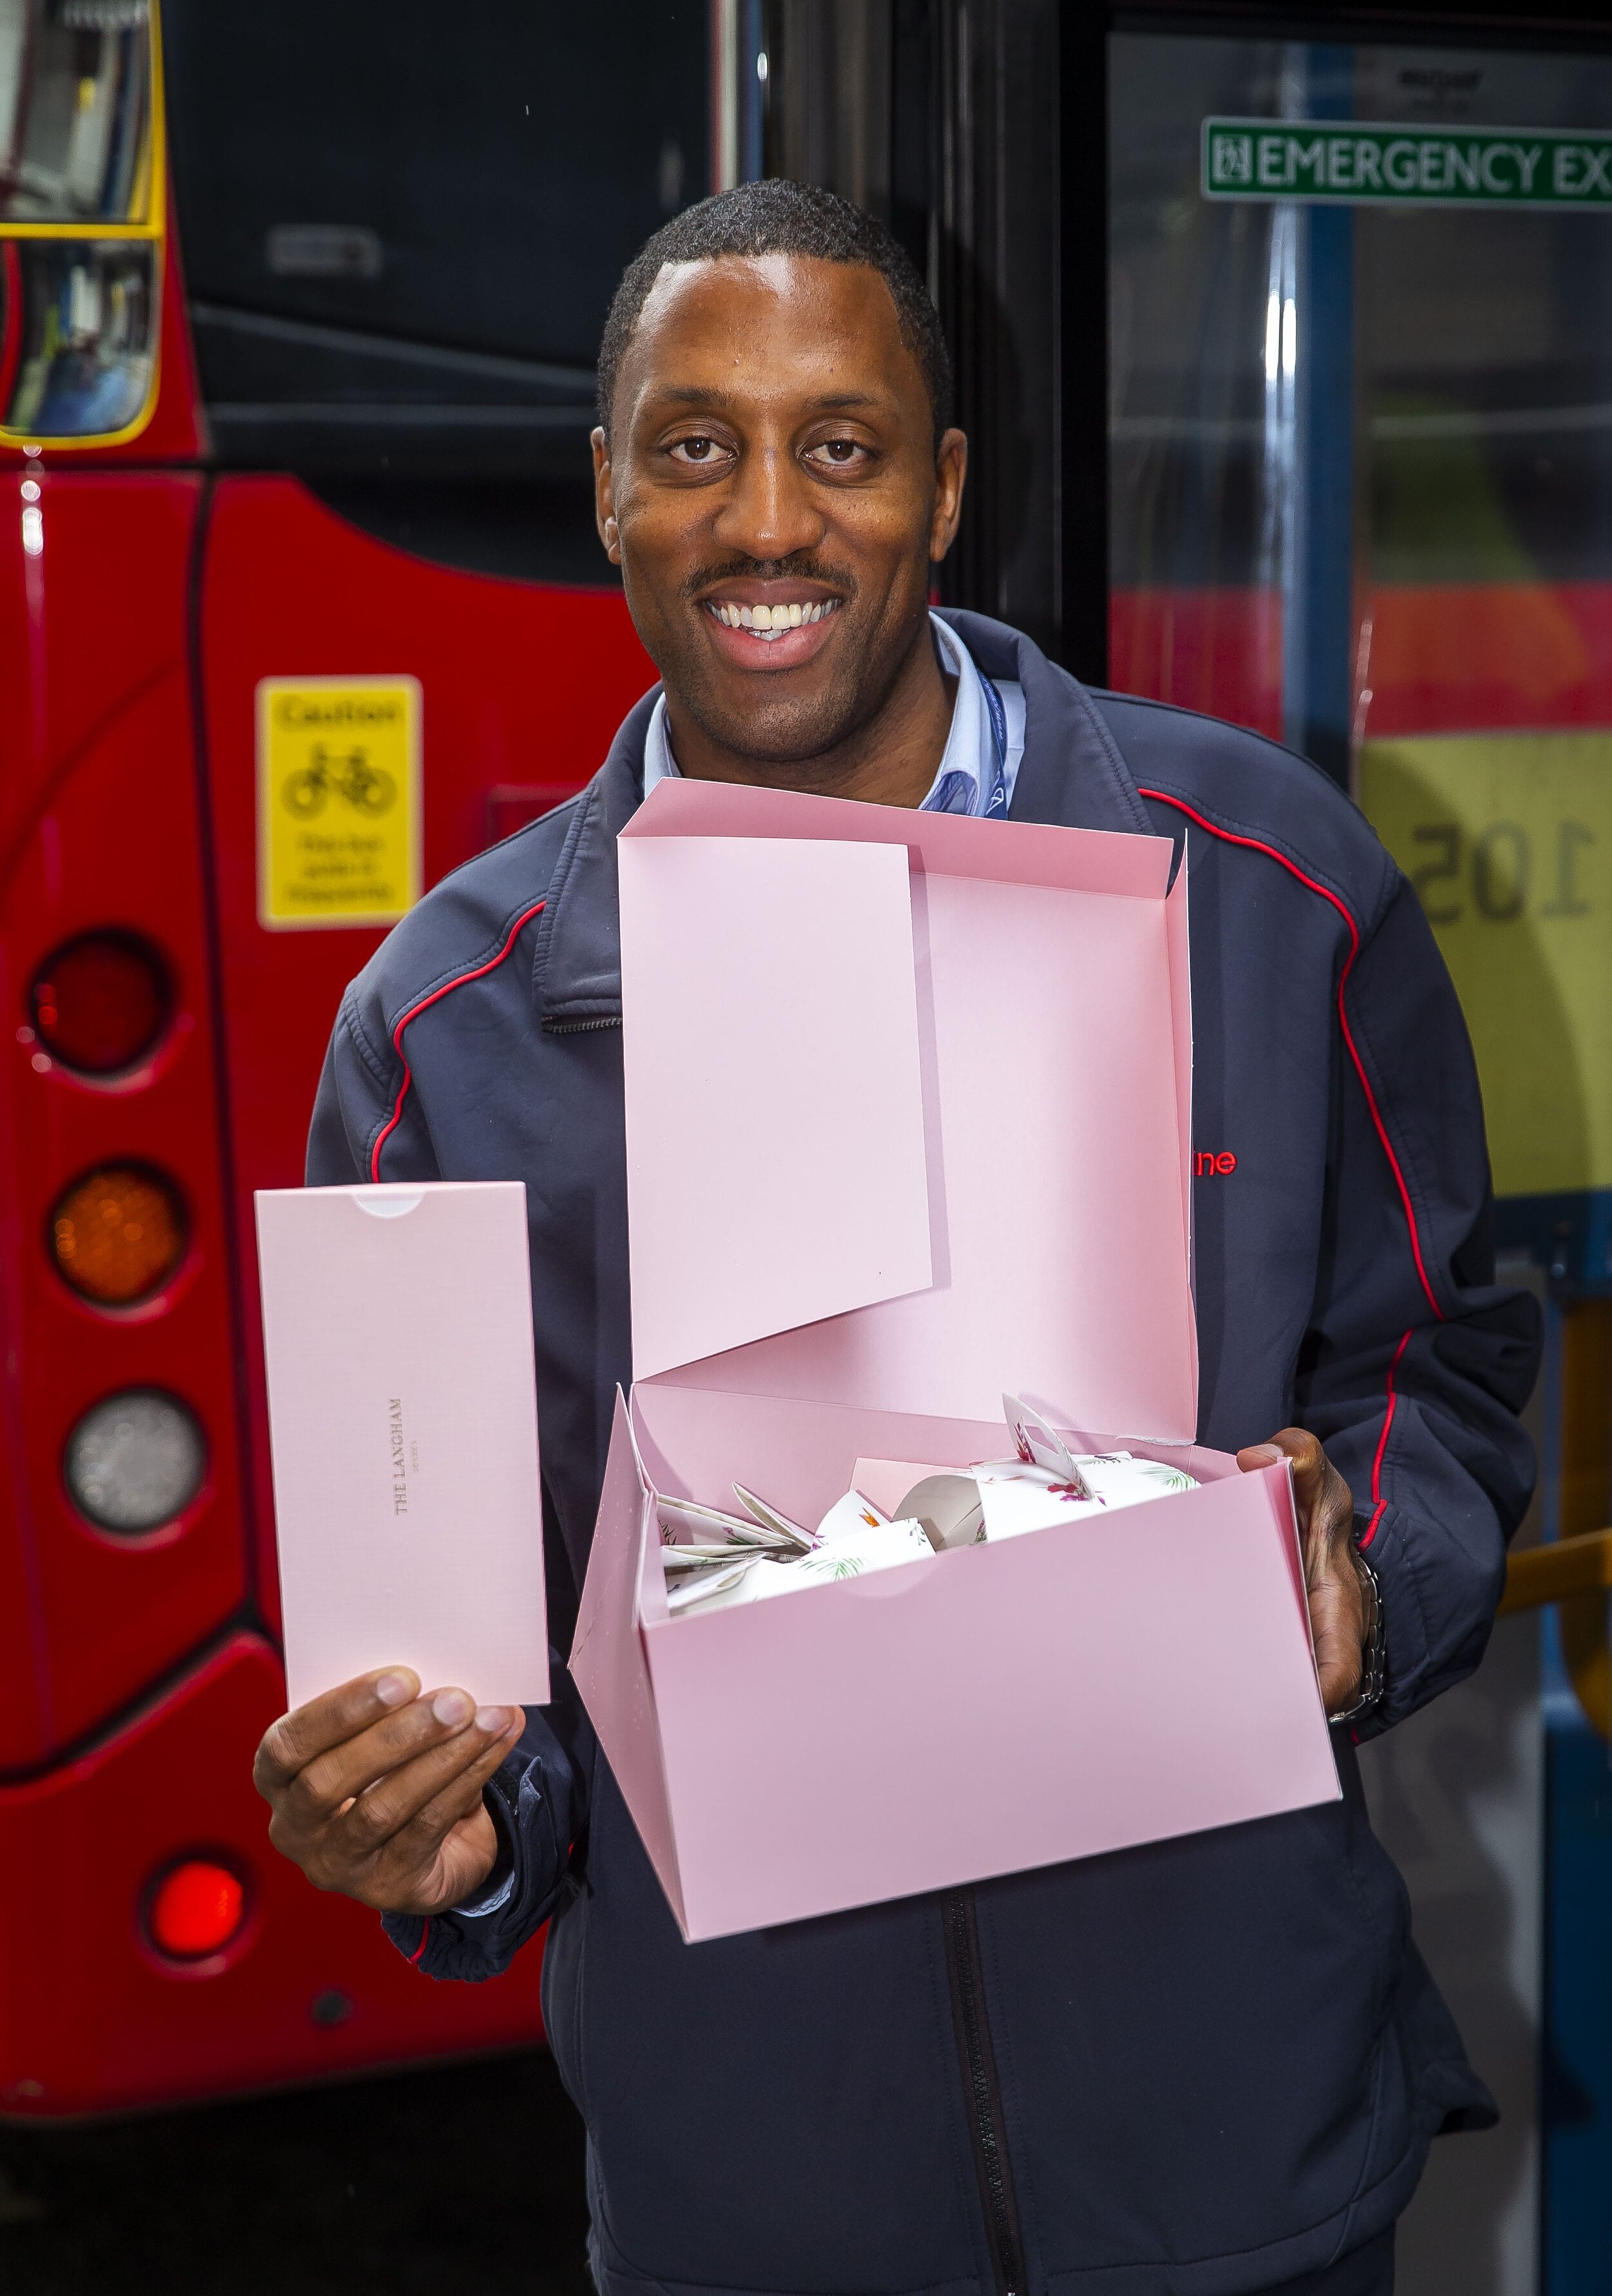 A bus driver holding the Langham afternoon box